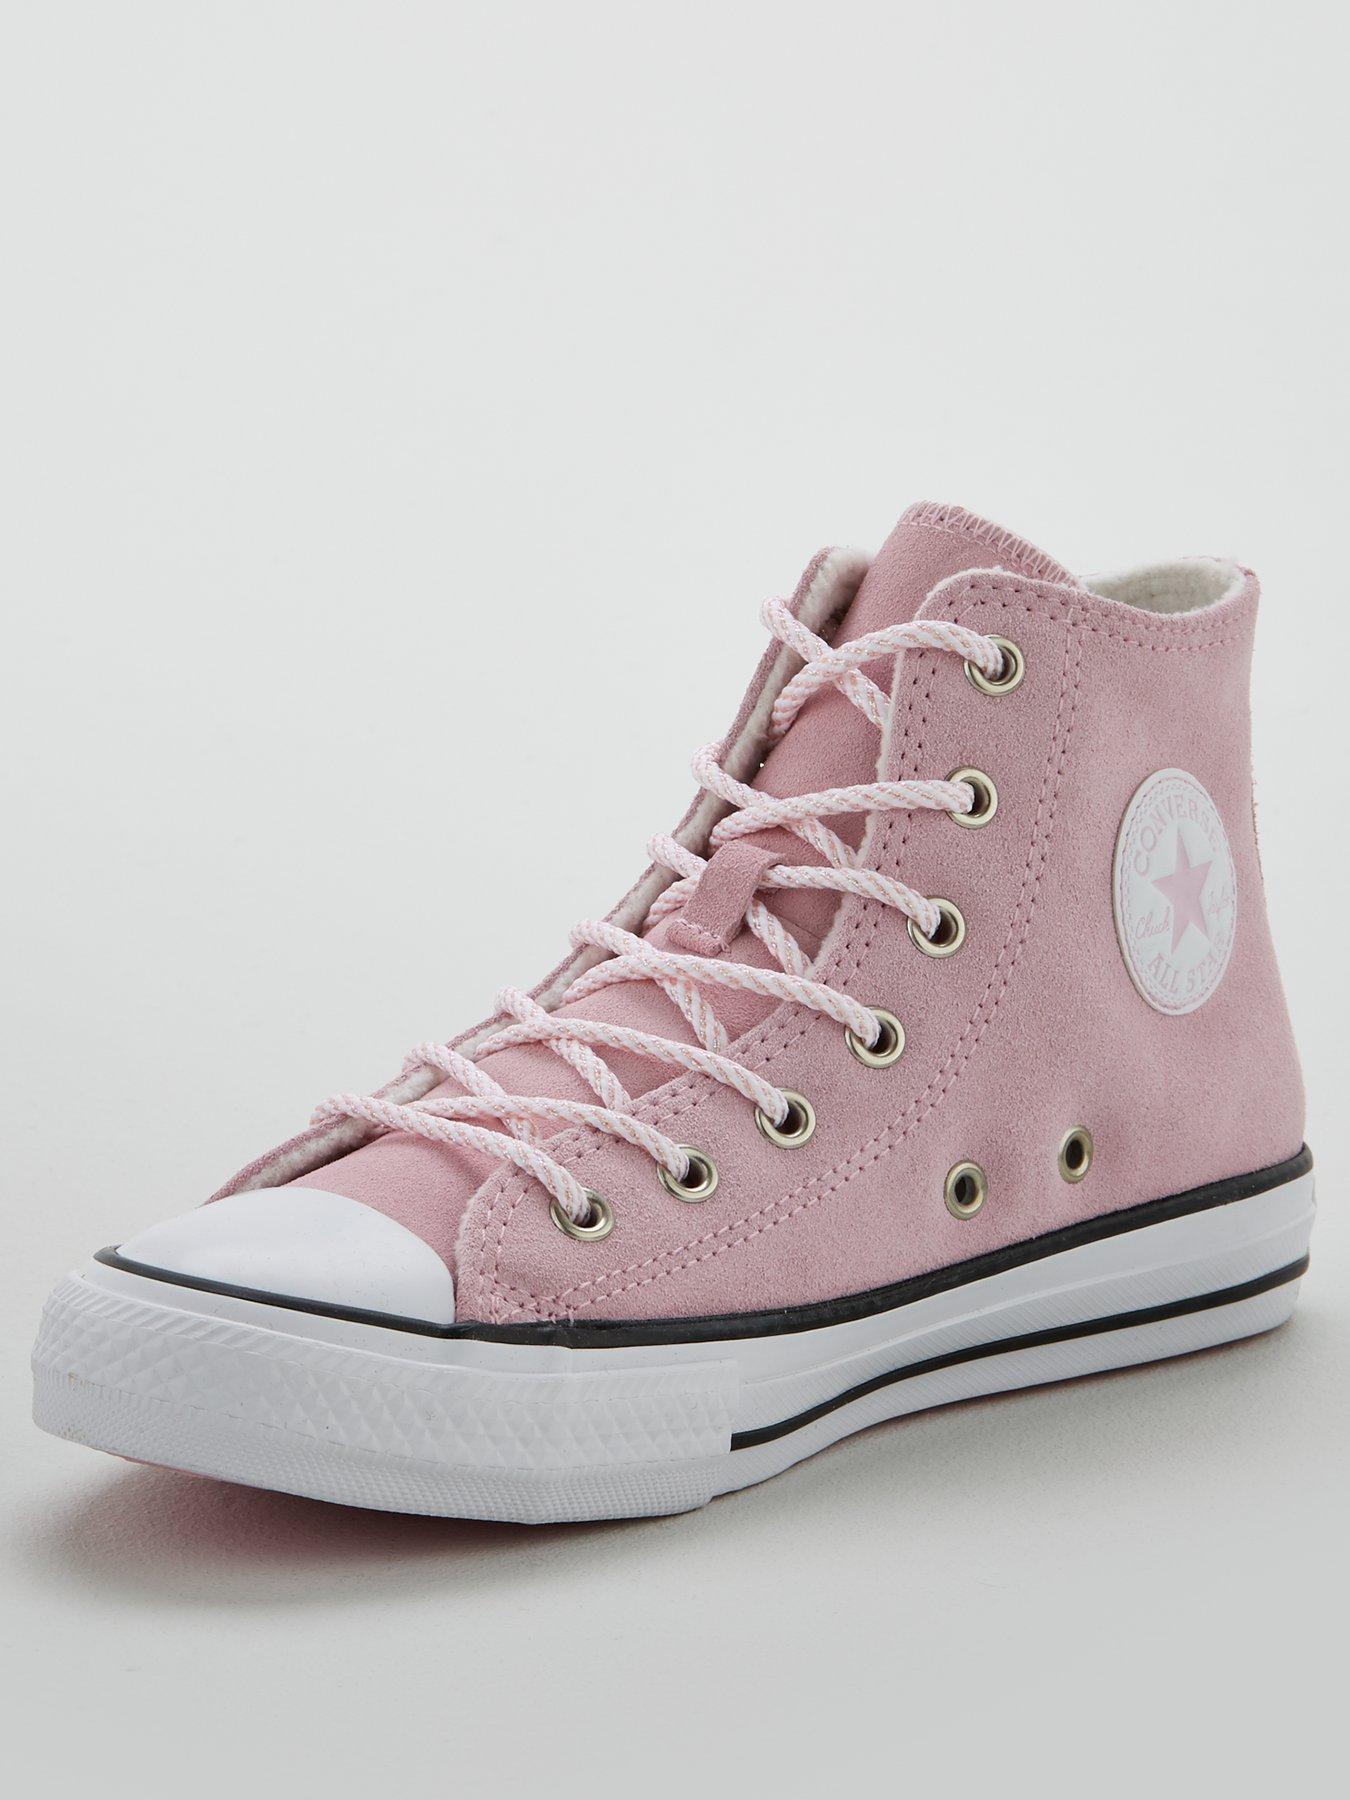 childrens converse on sale